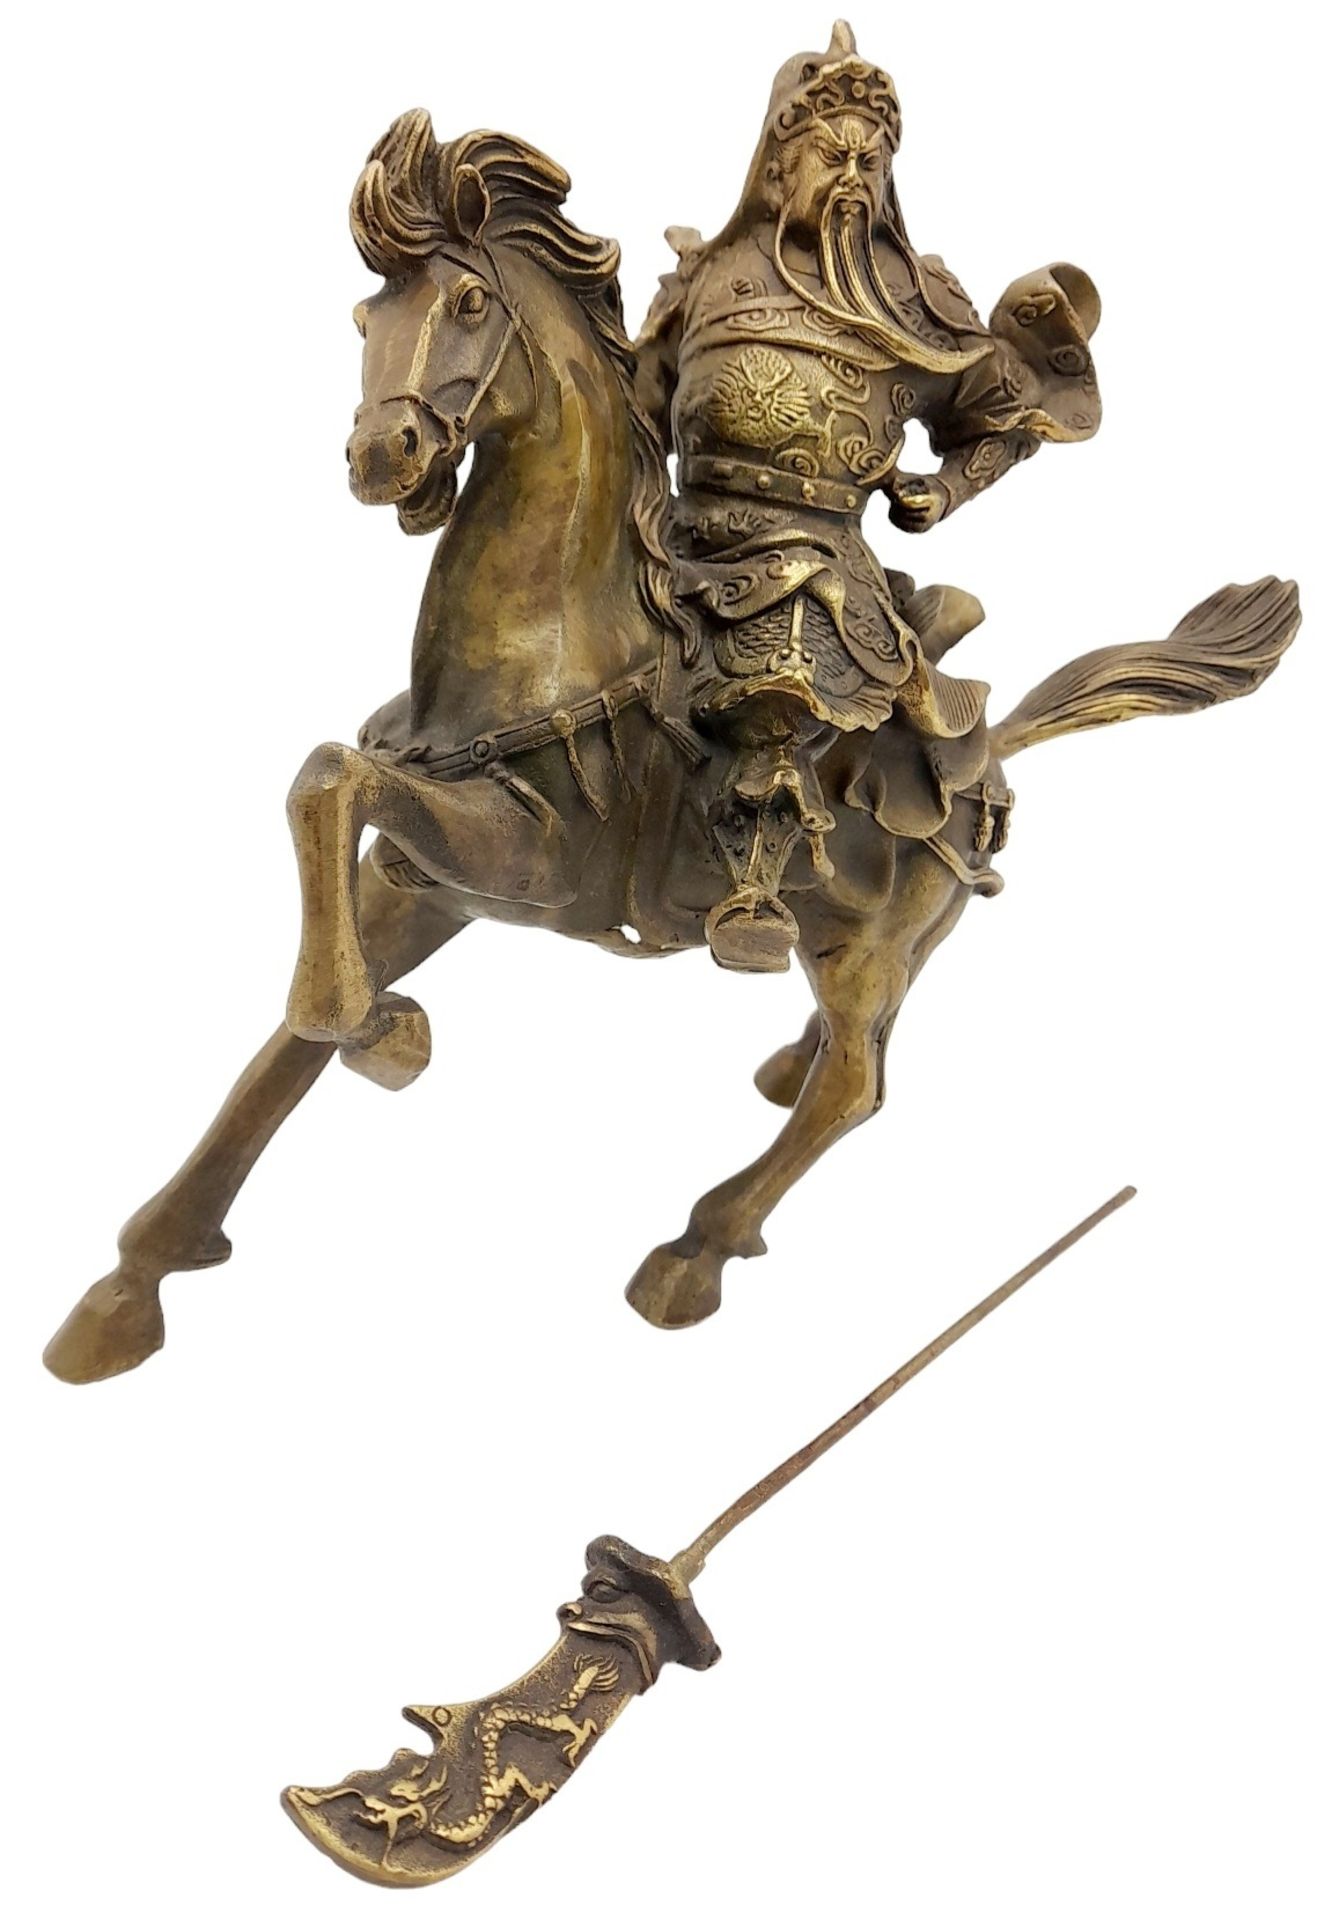 A Vintage Chinese Copper Guan Gong (God of war and wealth) on Horseback Statue. 23cm x 19cm tall. - Image 5 of 6